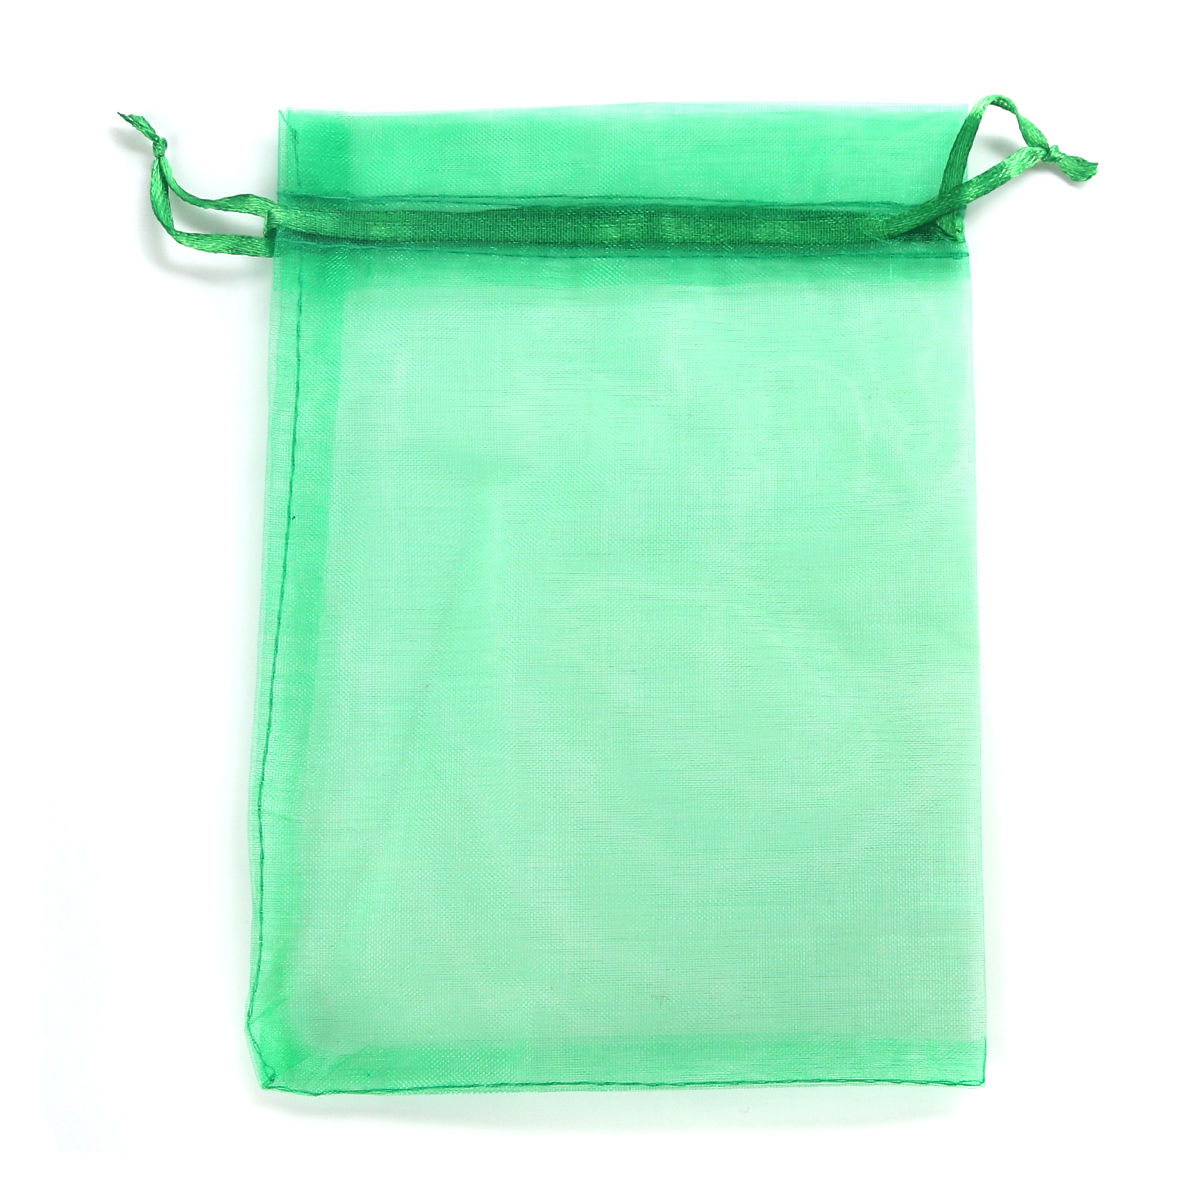 Picture of Wedding Gift Organza Jewelry Bags Drawstring Rectangle Dark Green (Usable Space: 13.5x10.5cm) 16cm x 11cm, 20 PCs